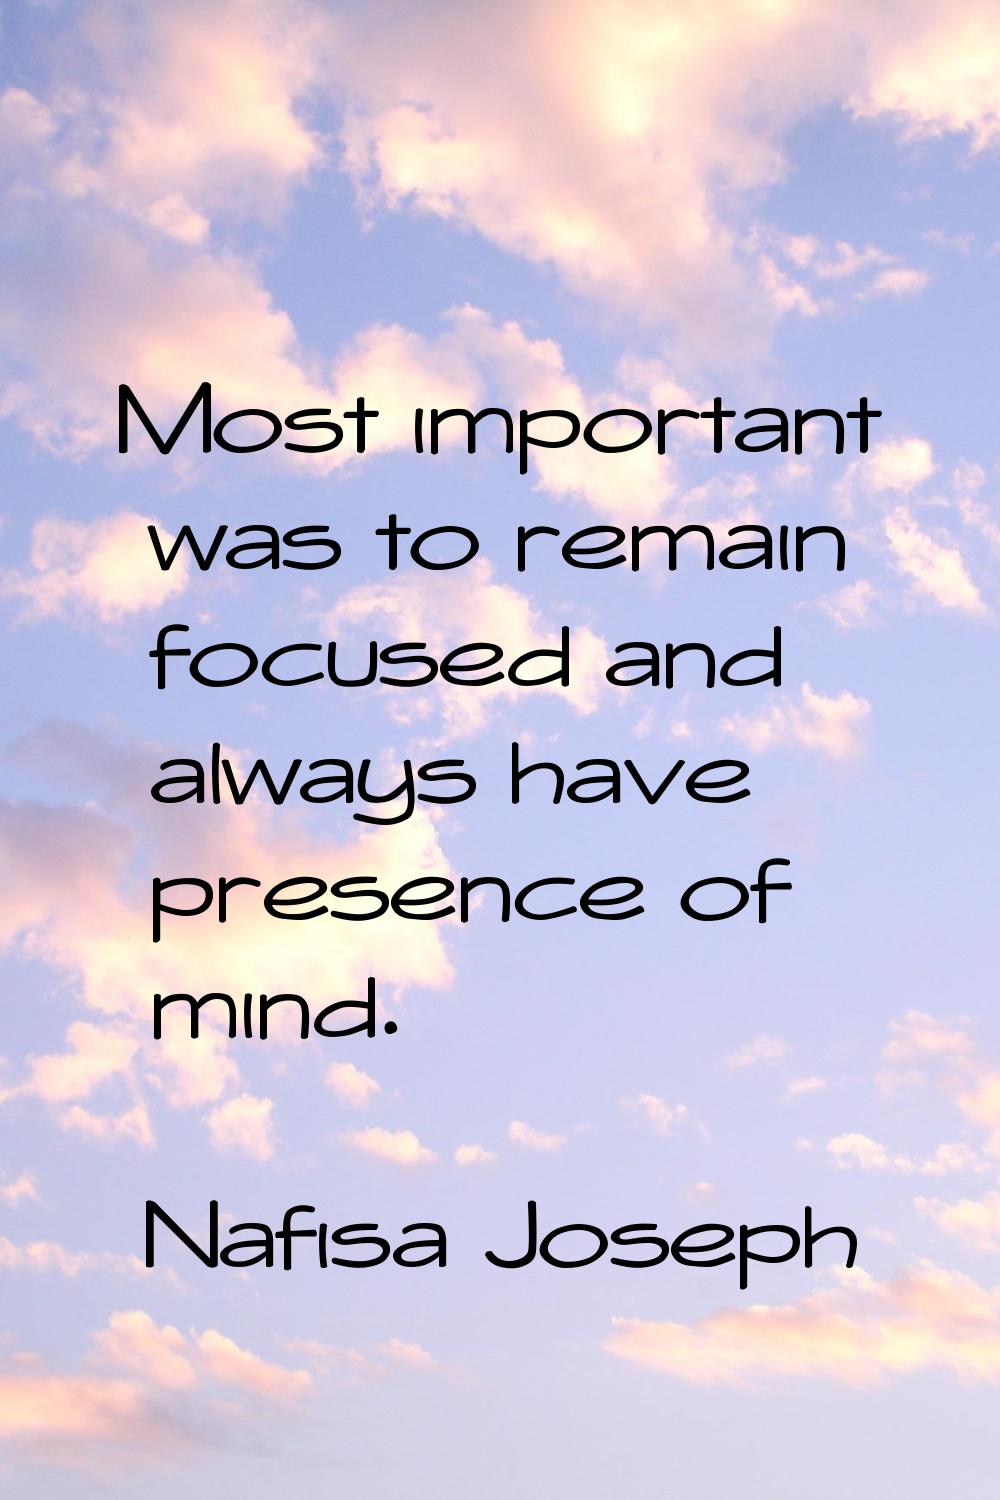 Most important was to remain focused and always have presence of mind.